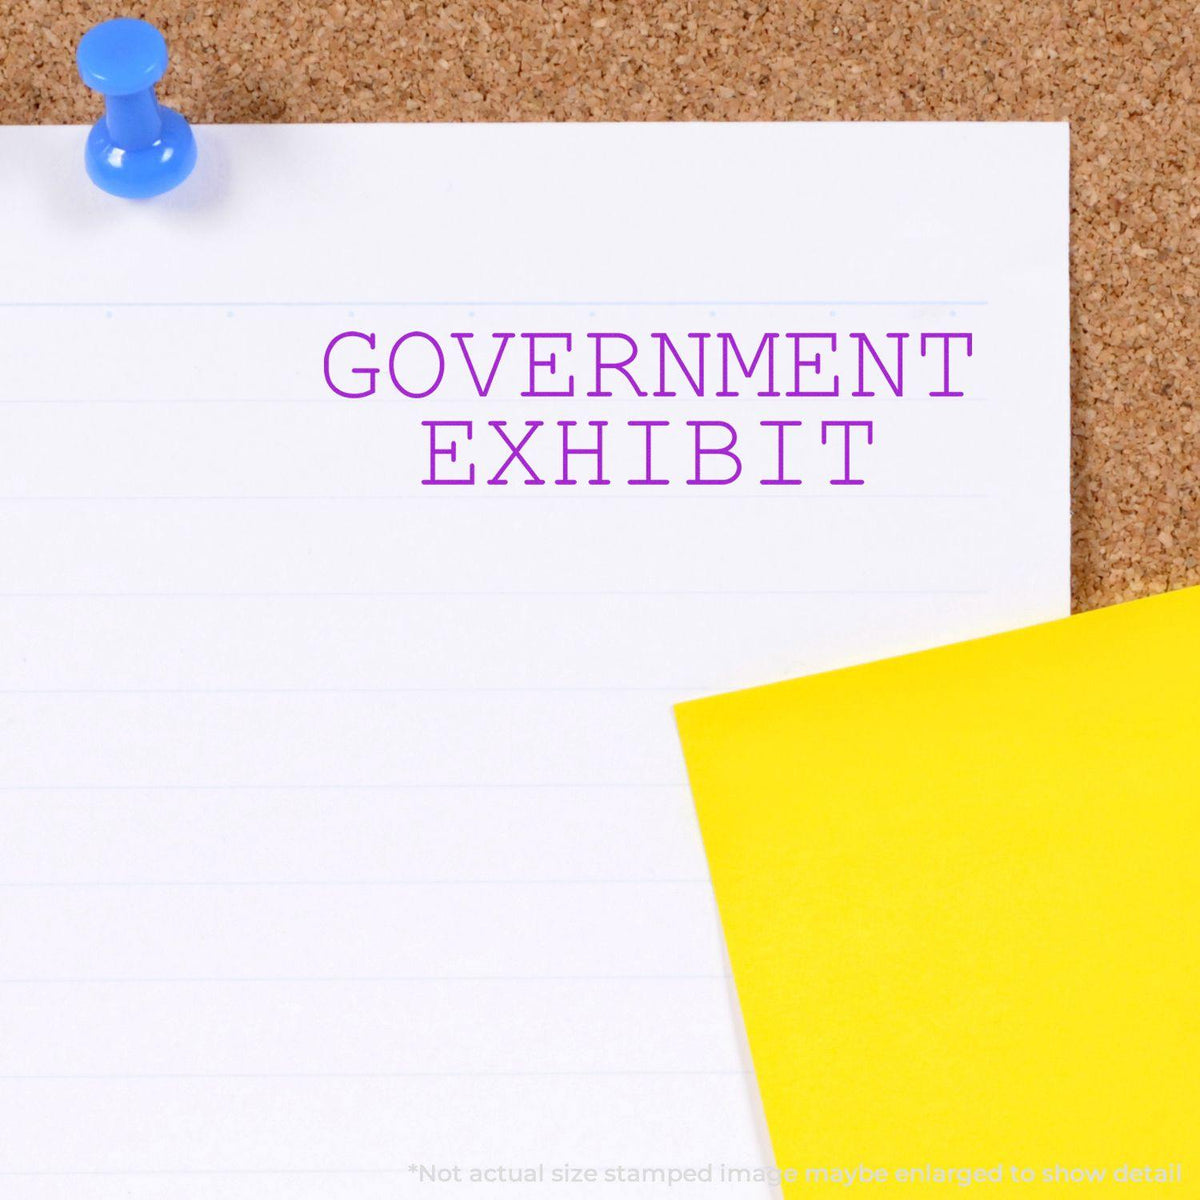 Large Government Exhibit Rubber Stamp In Use Photo